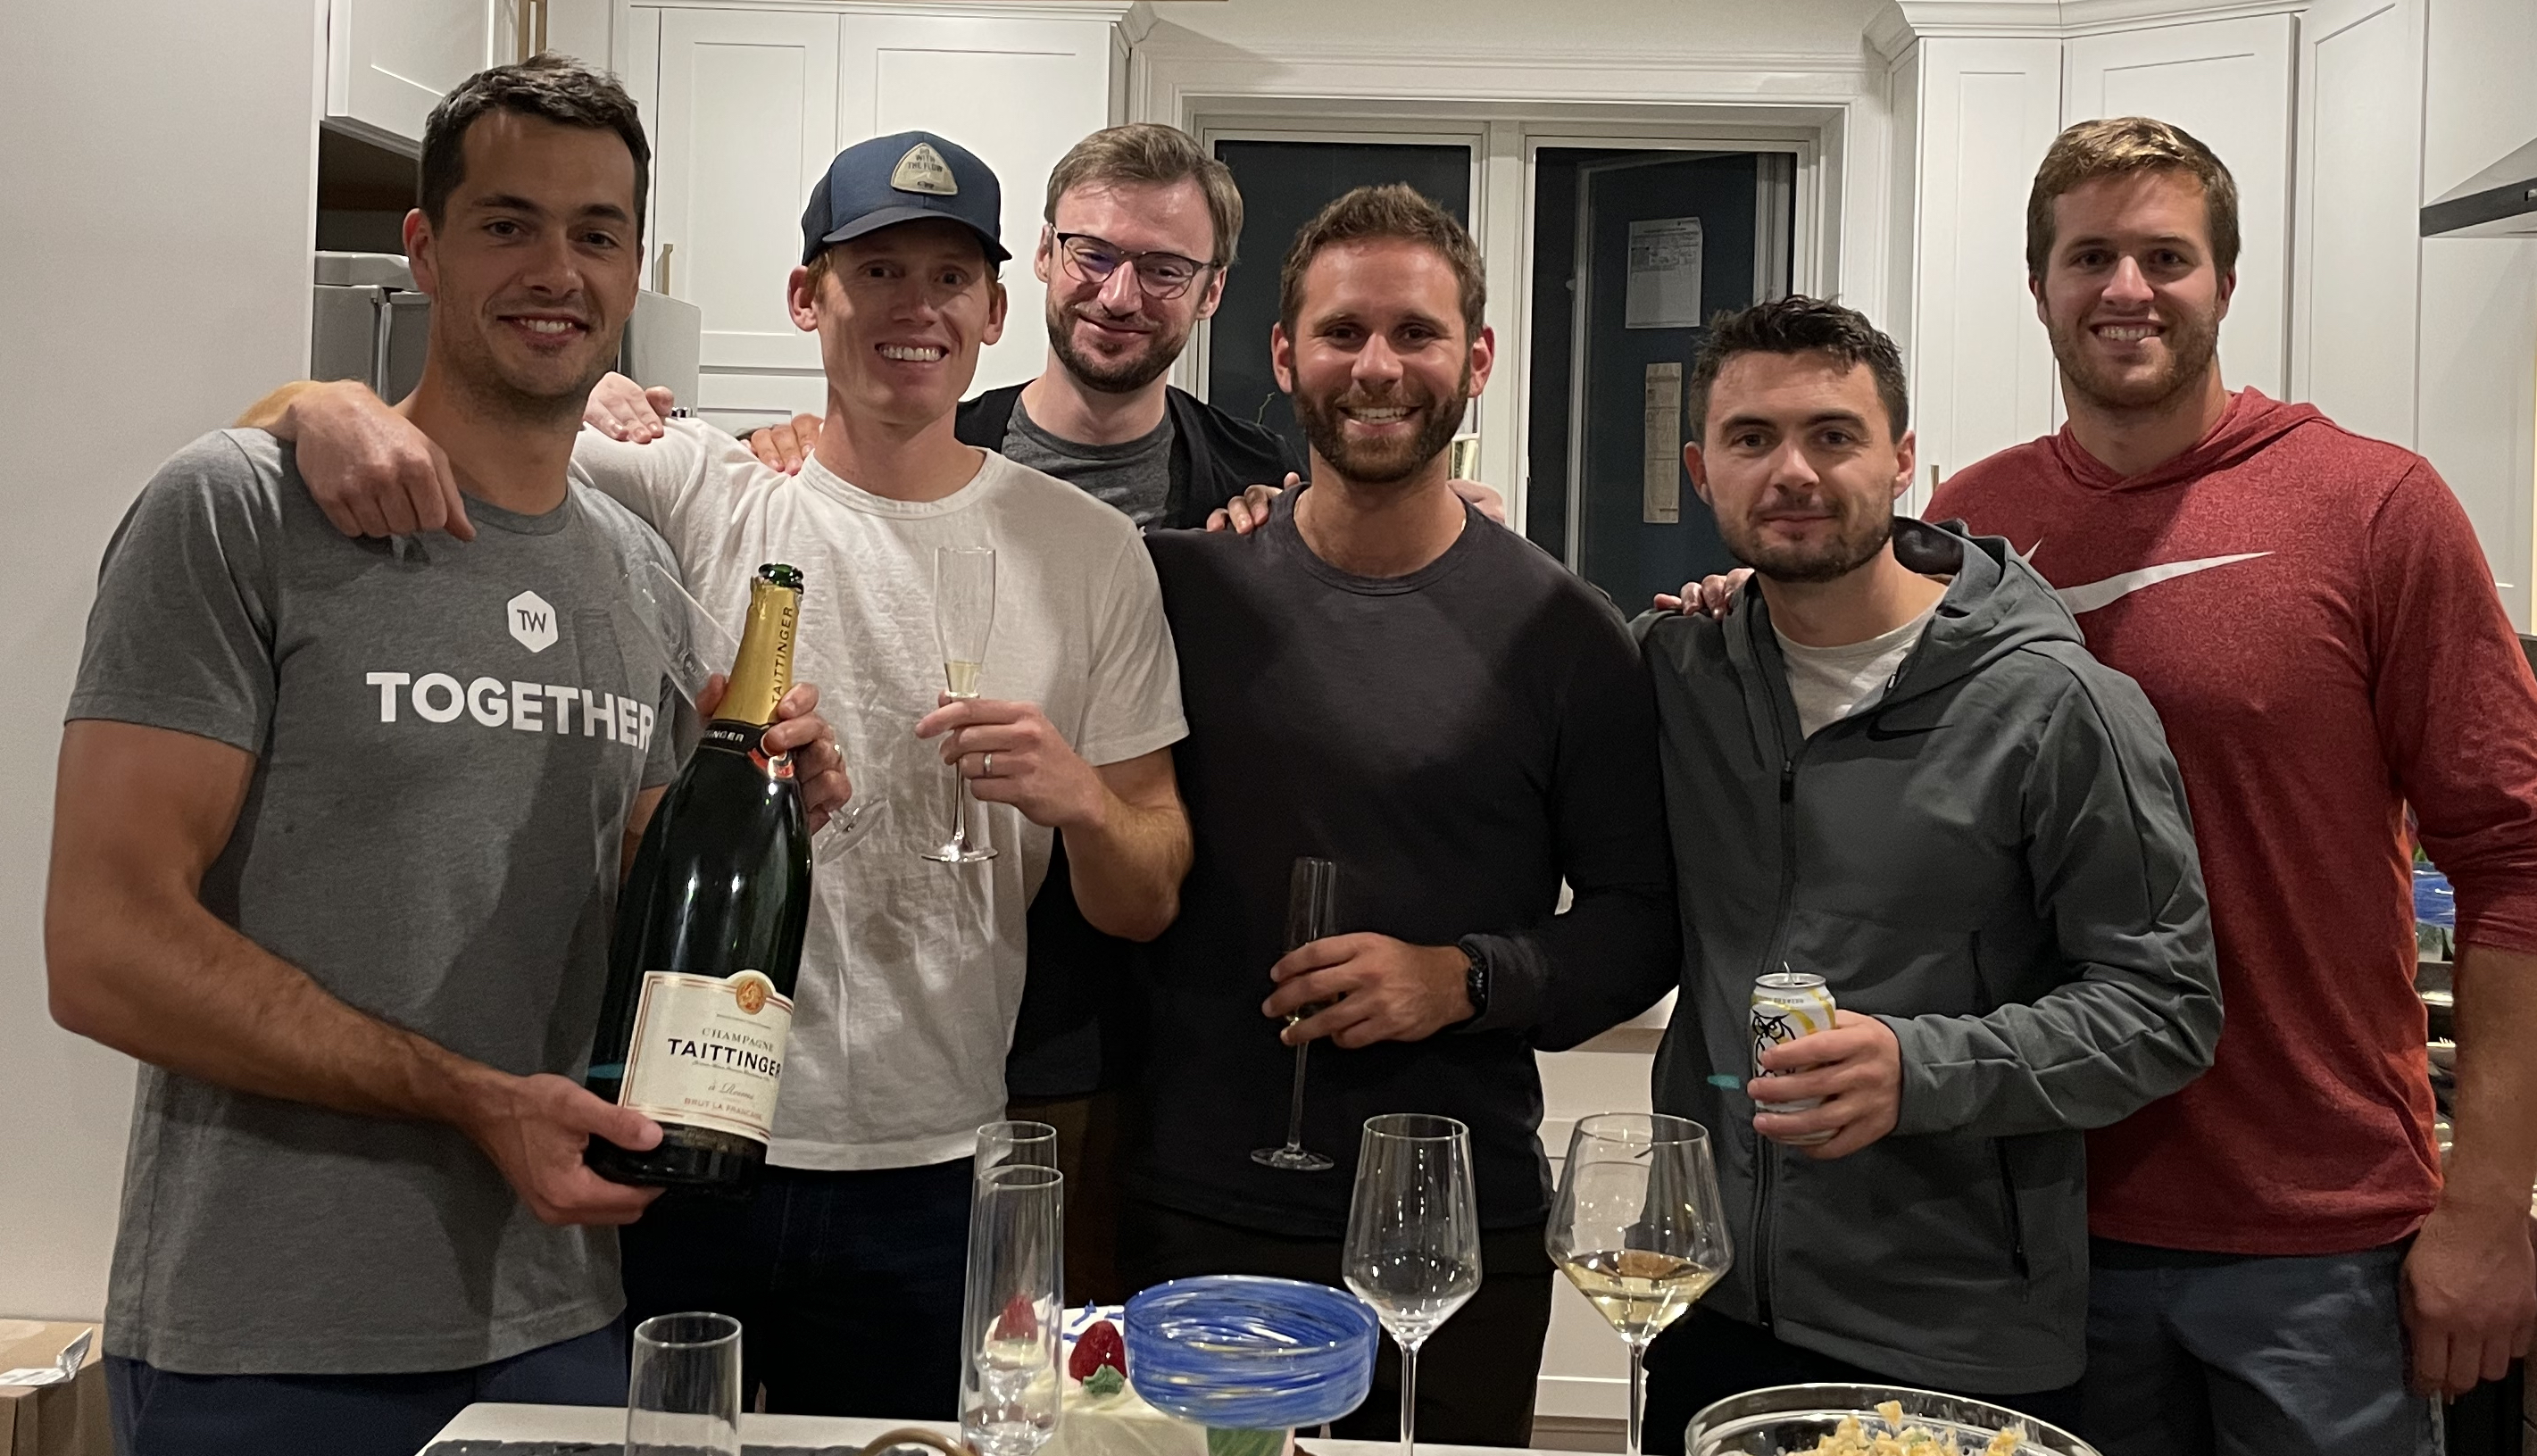 Sean and peers celebrate in a small gathering the evening of the acquisition.